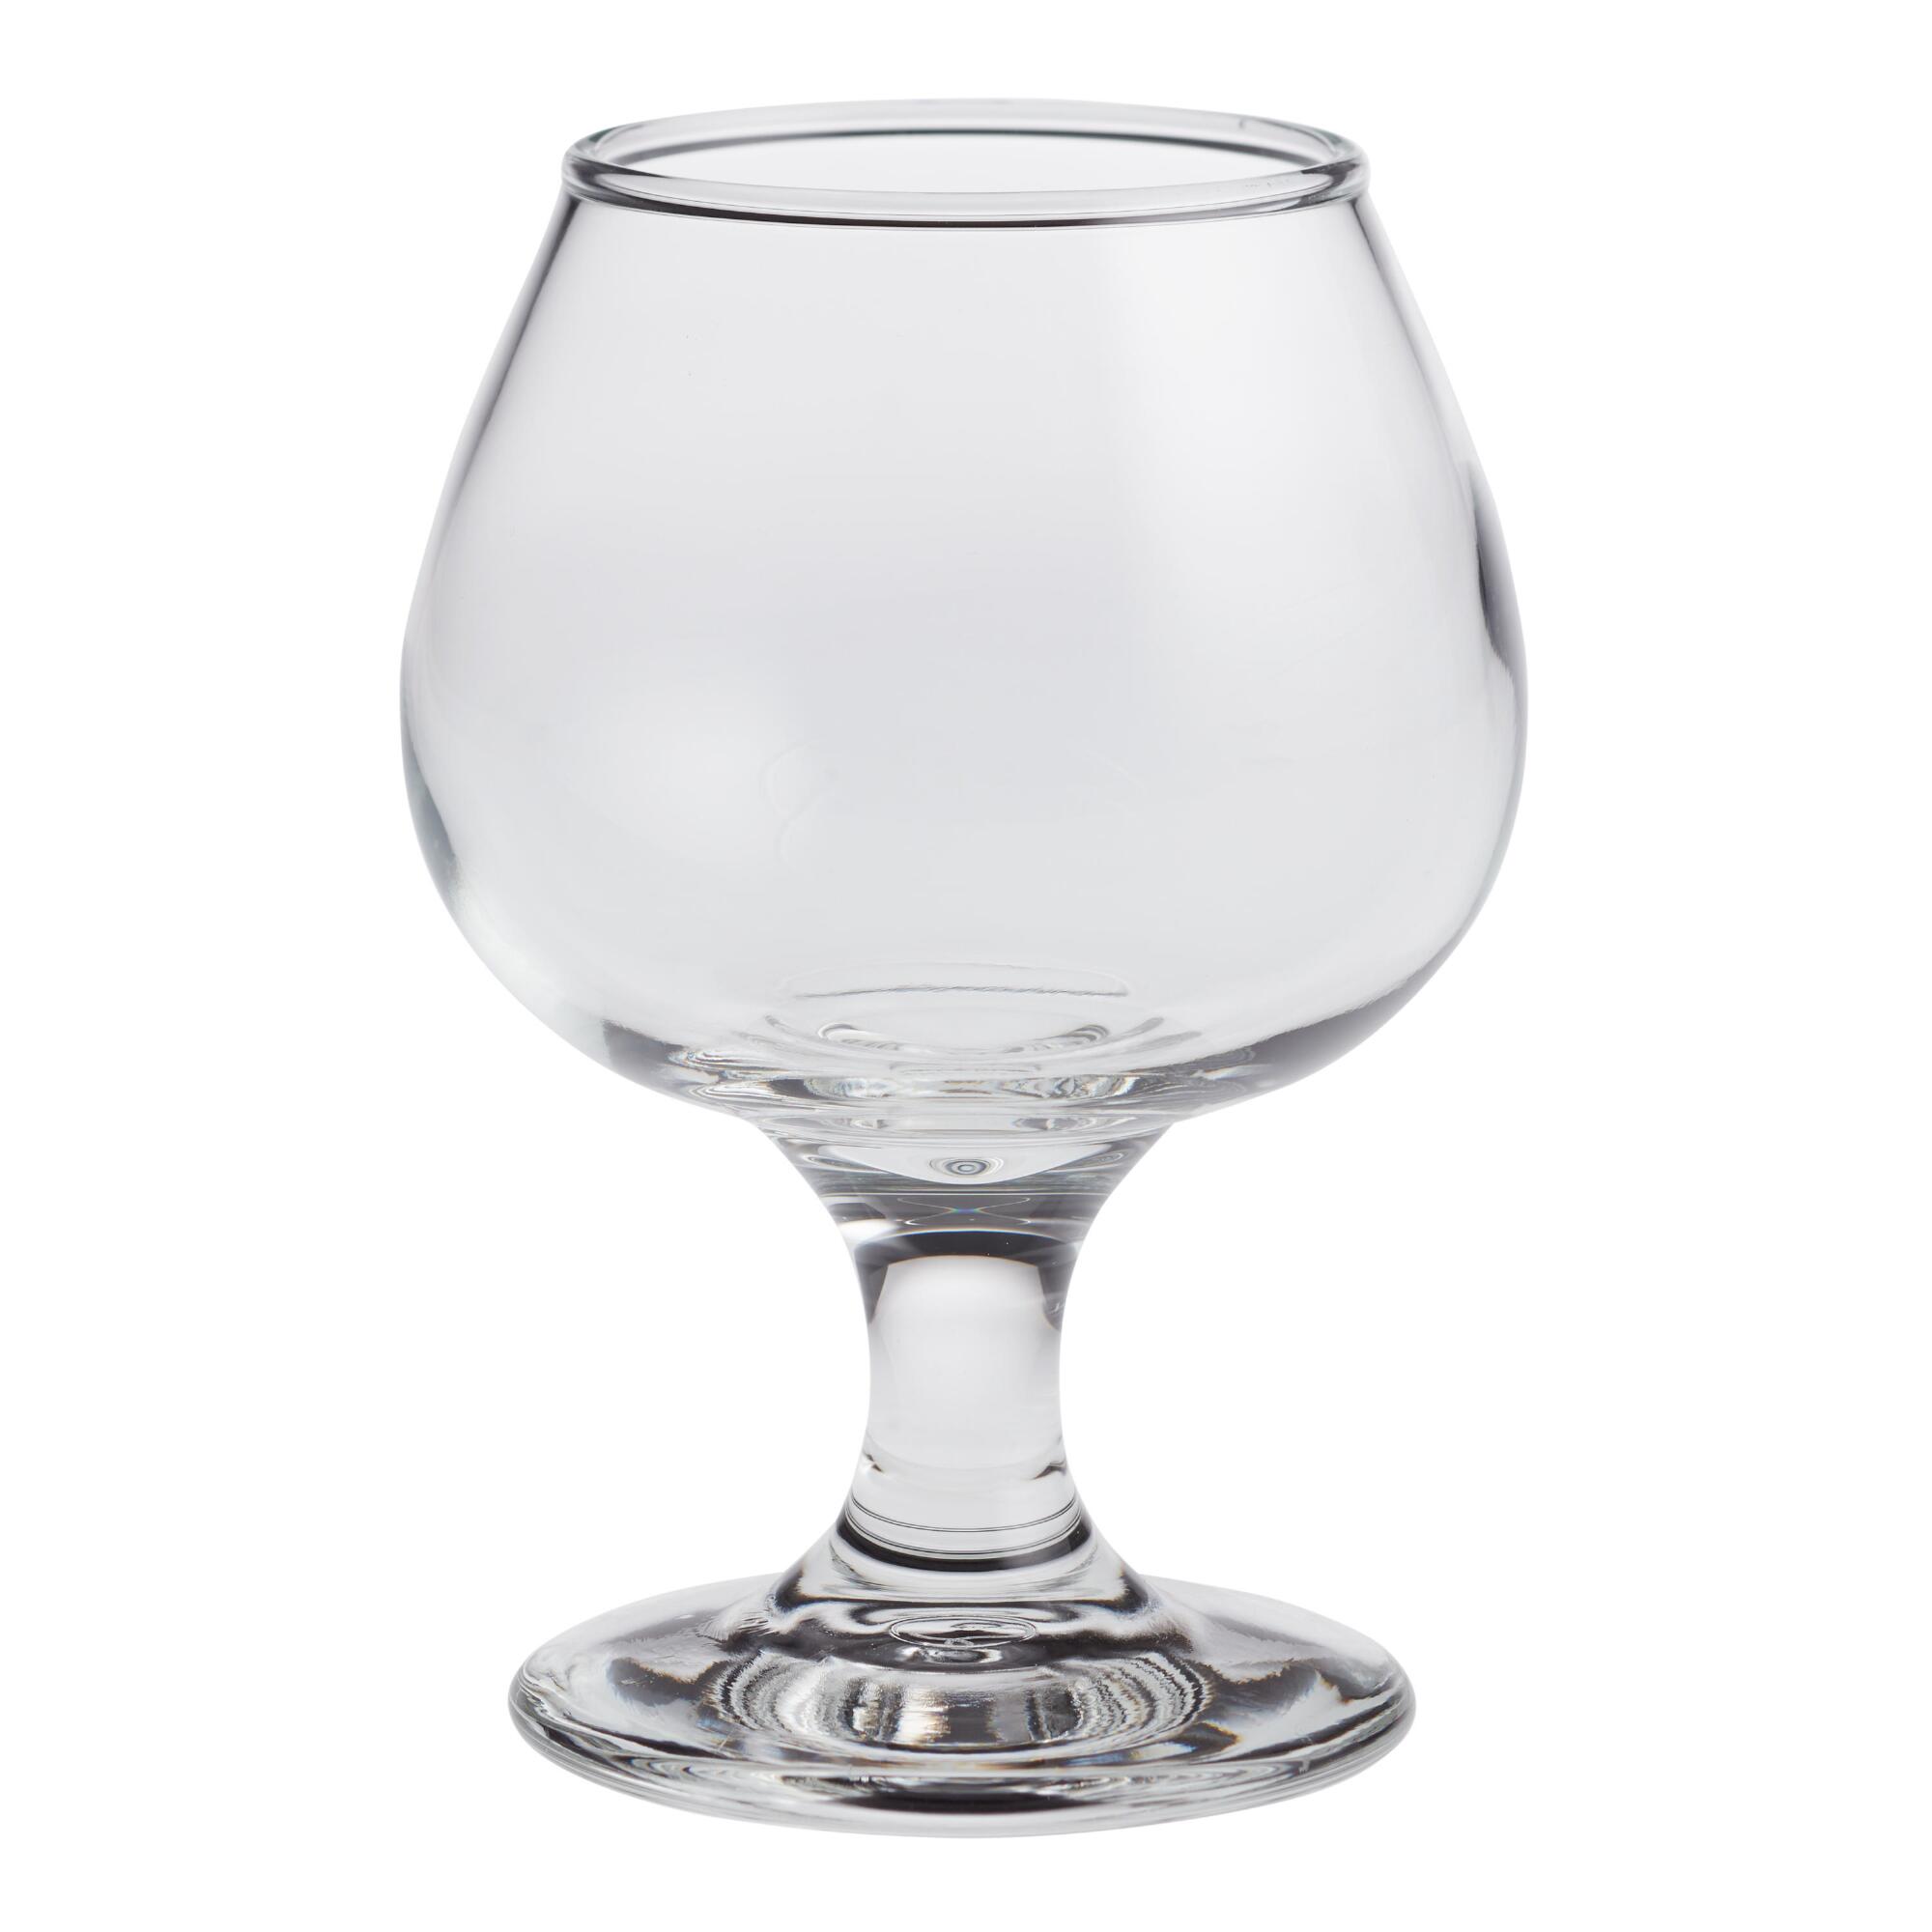 Small Brandy Glasses, Set of 4 by World Market